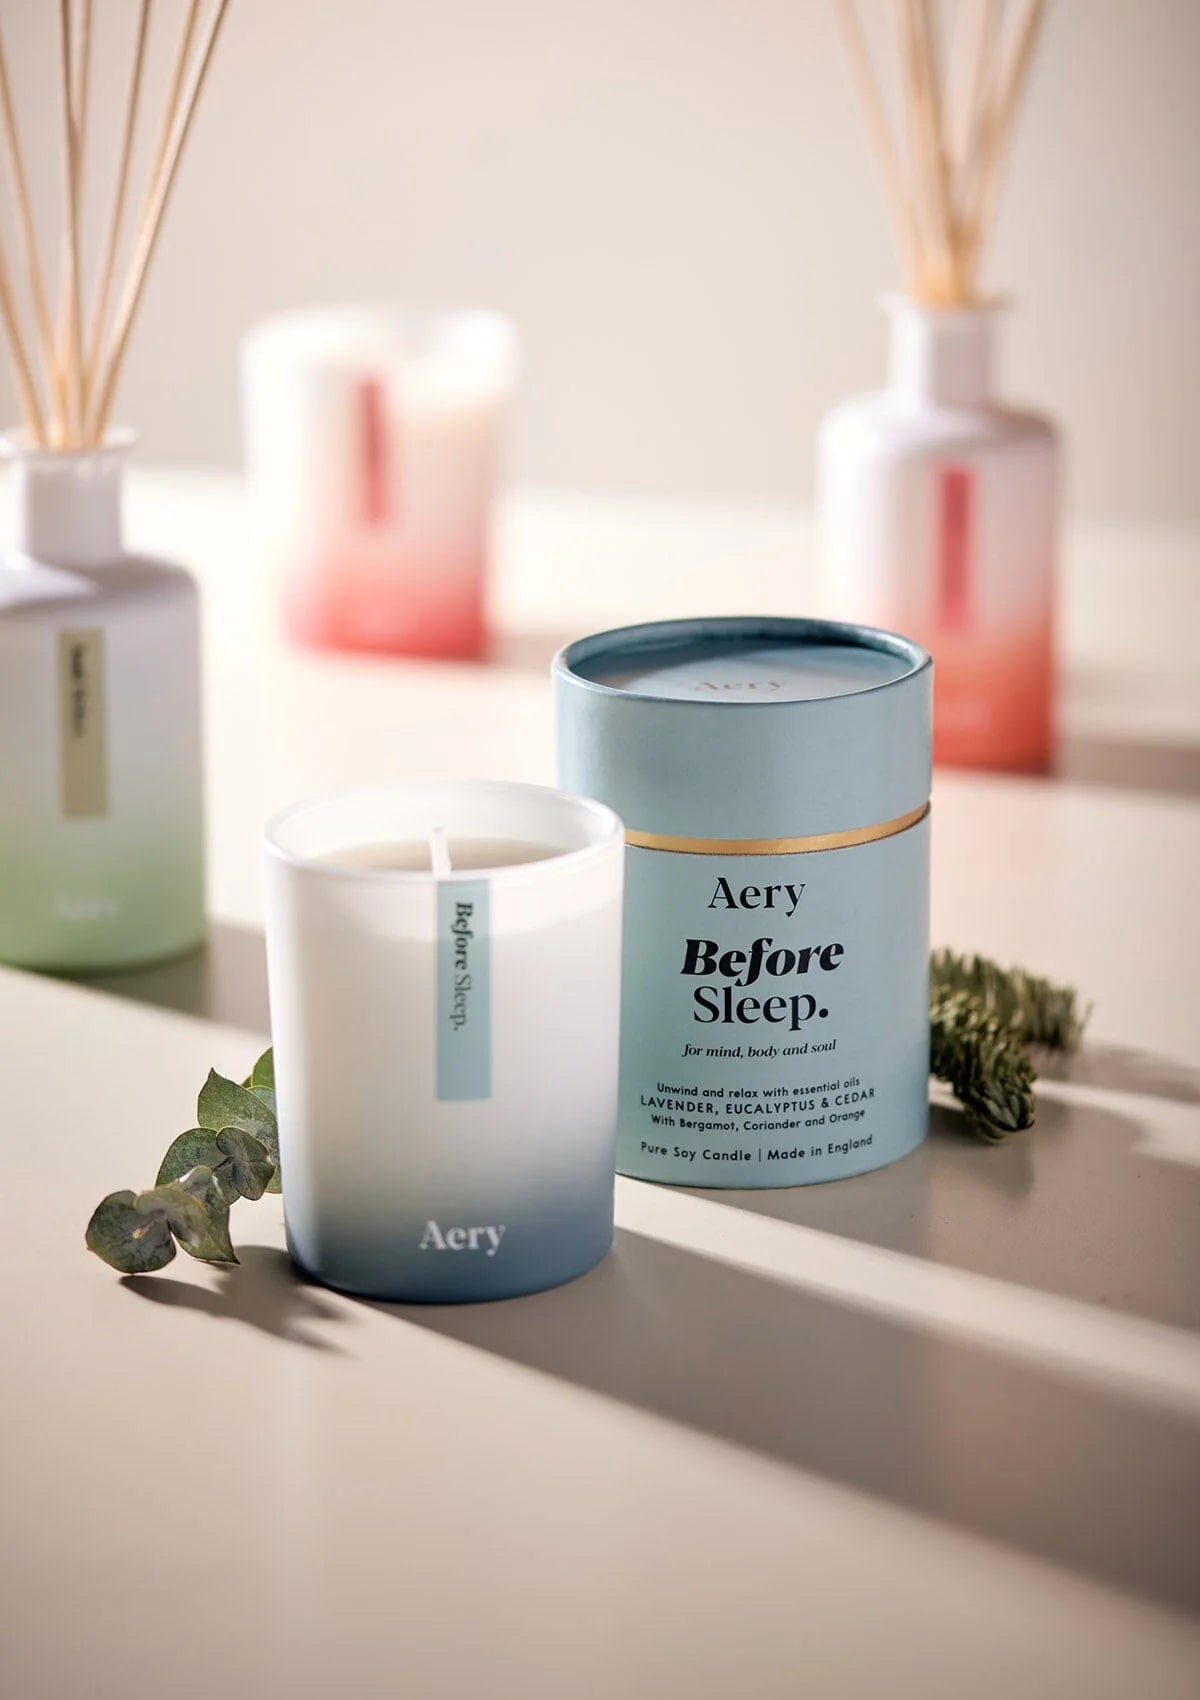 Aery Before Sleep Scented Candle - Blå